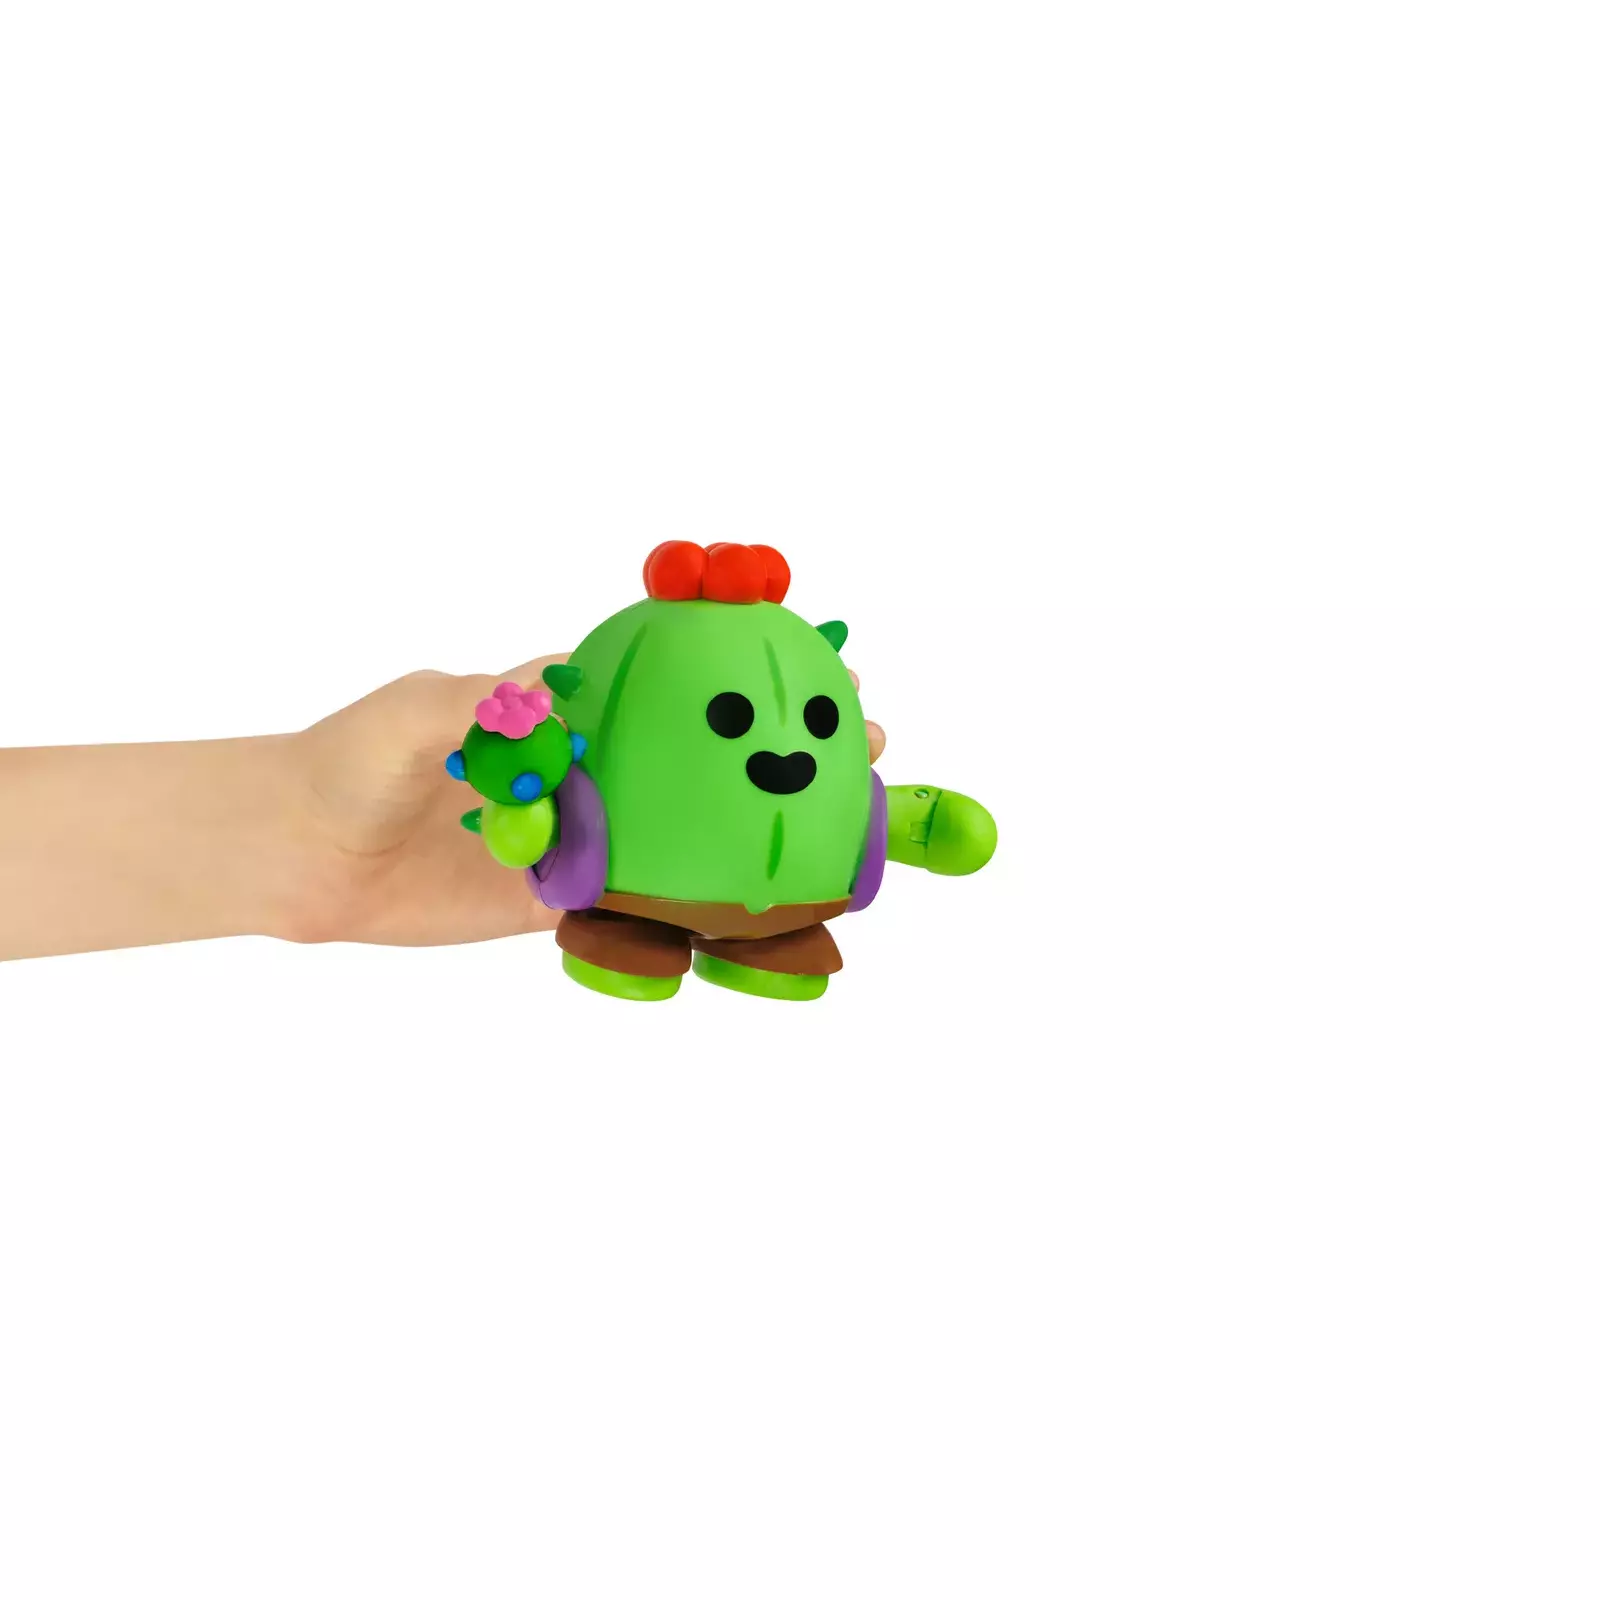 Am i the only one who thinks the spike plush is fire? : r/Brawlstars